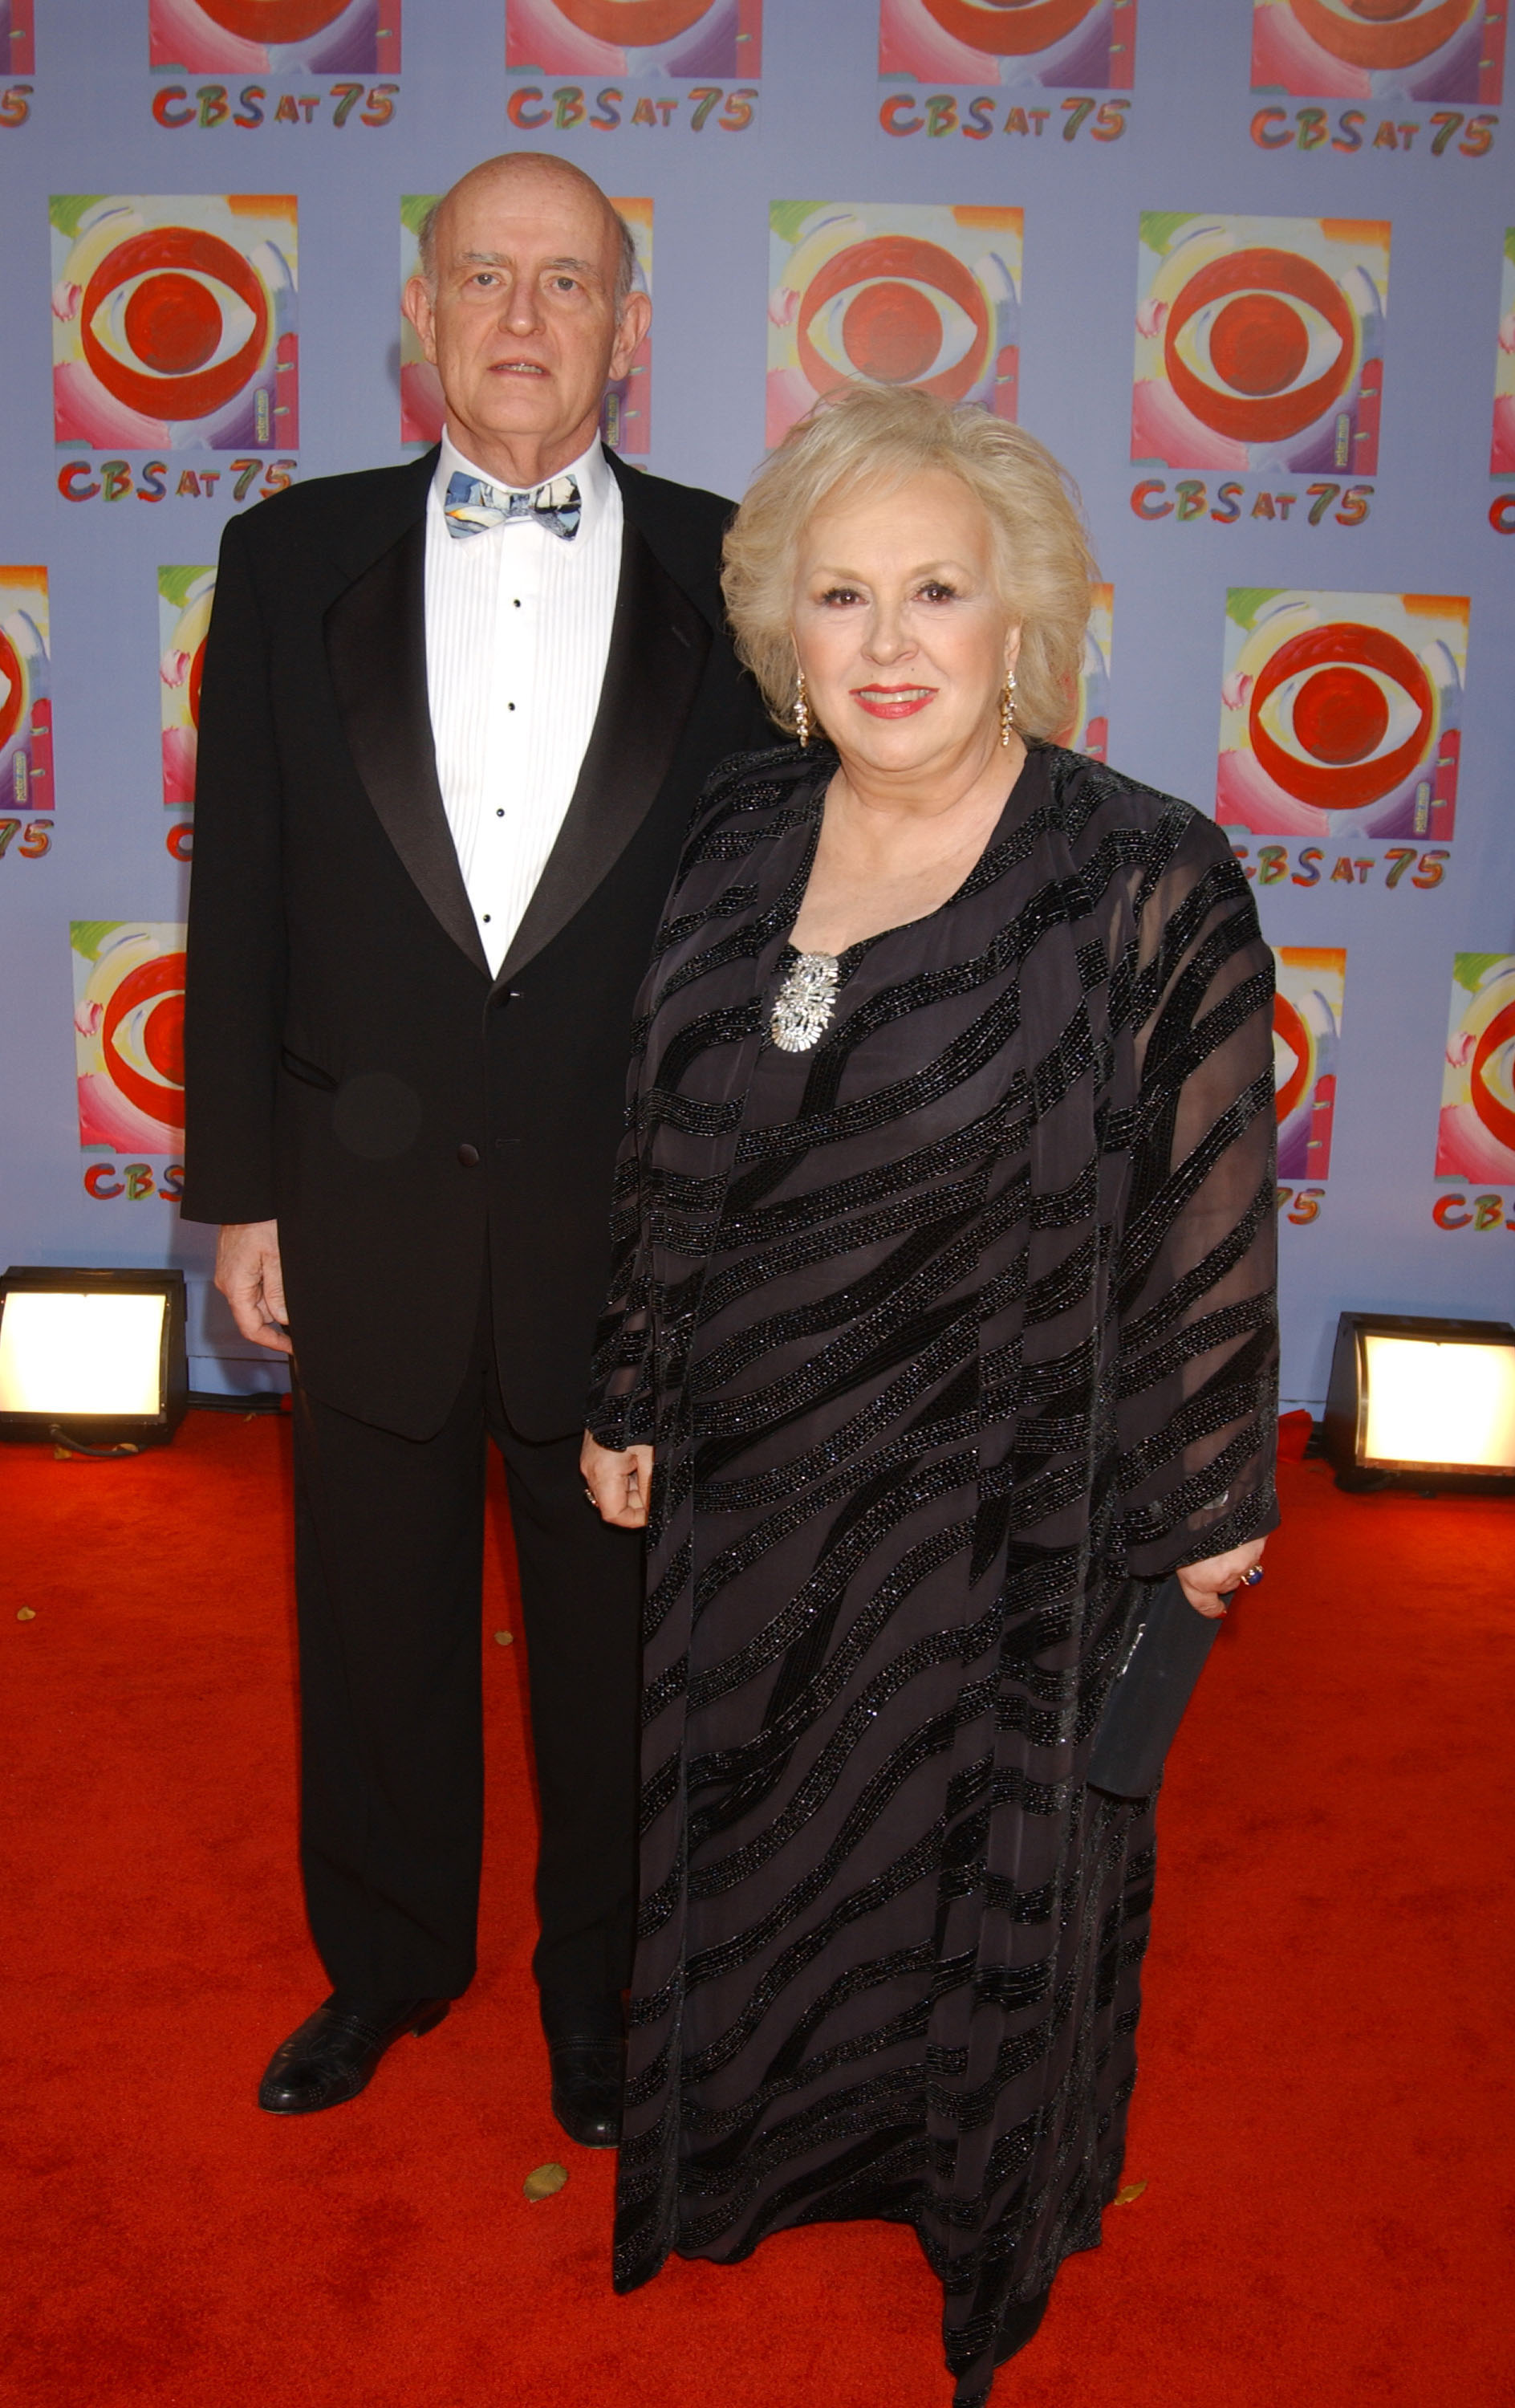 Peter Boyle and Doris Roberts from 'Everybody Loves Raymond'